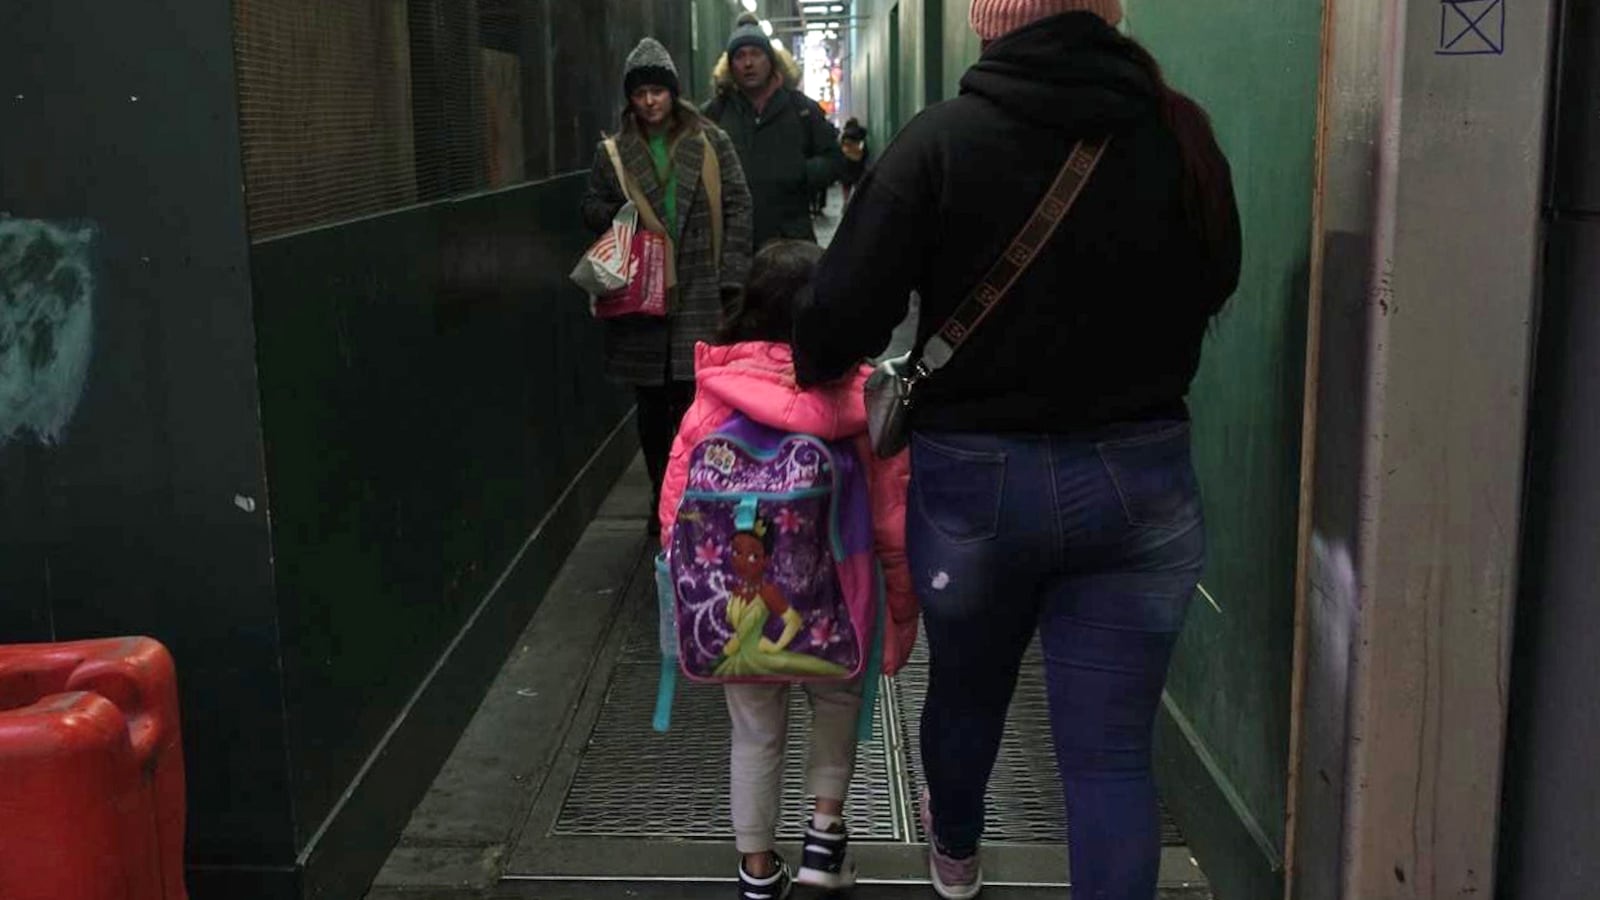 An adult and a child walk away from the camera down an aisle with green walls.